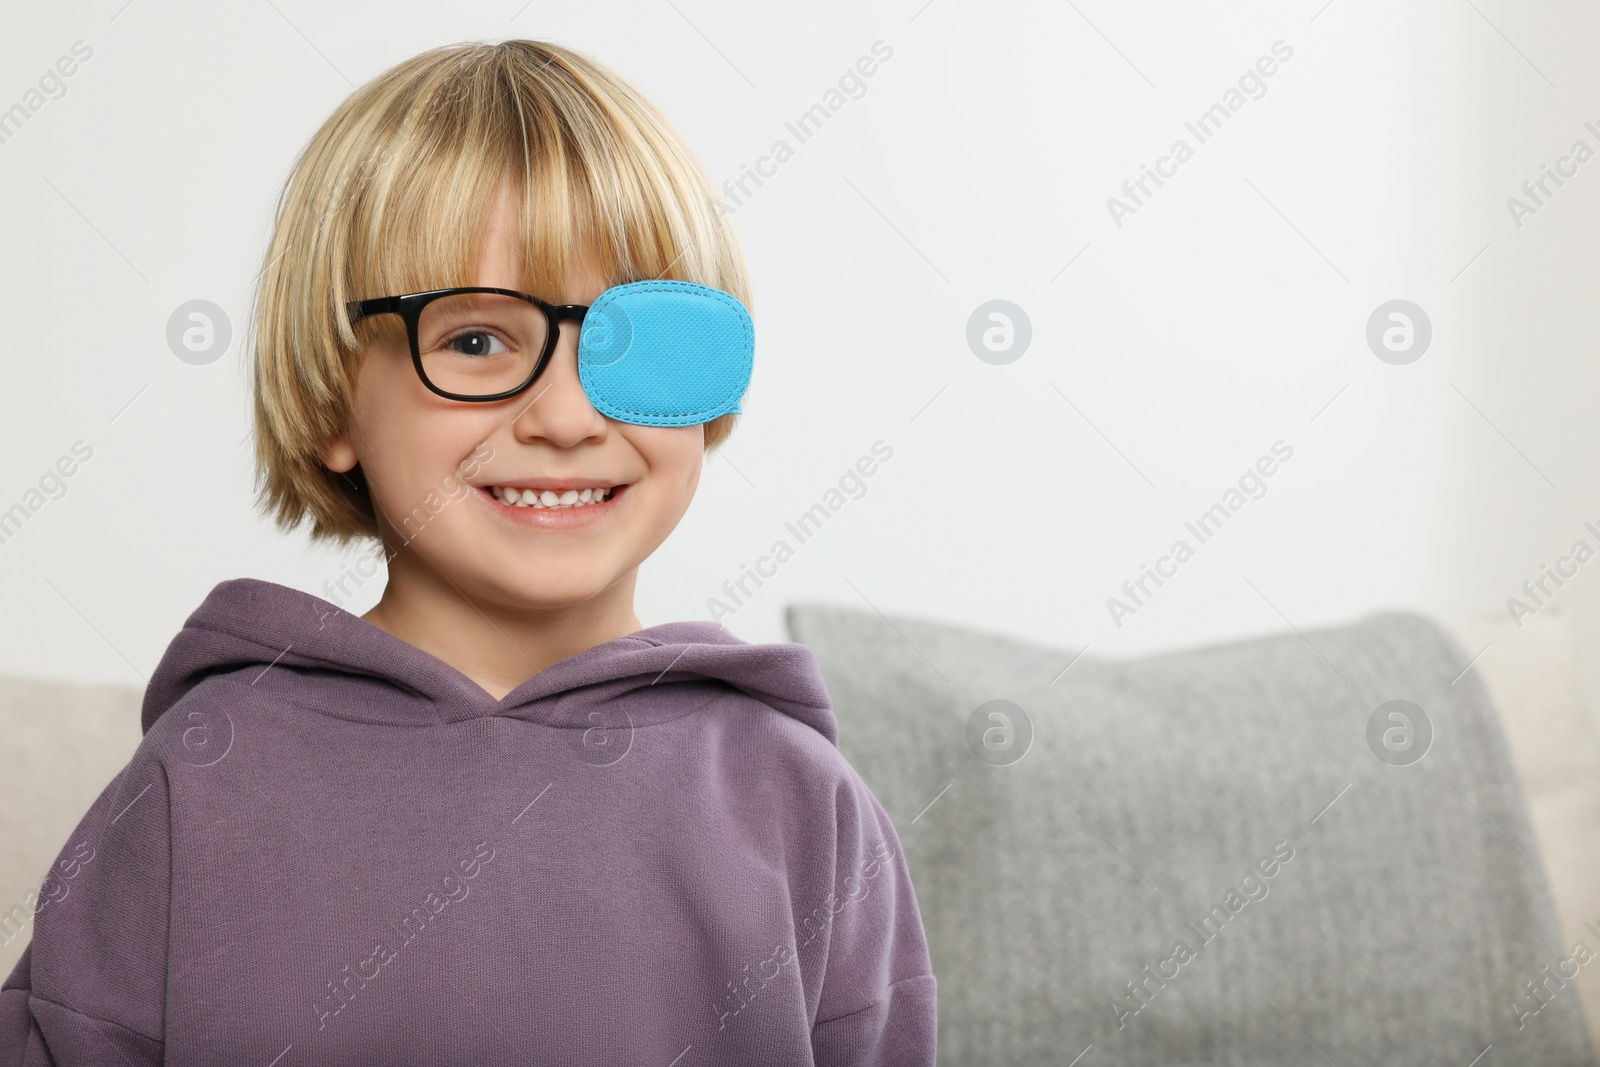 Photo of Happy boy with nozzle on glasses for treatment of strabismus in room. Space for text